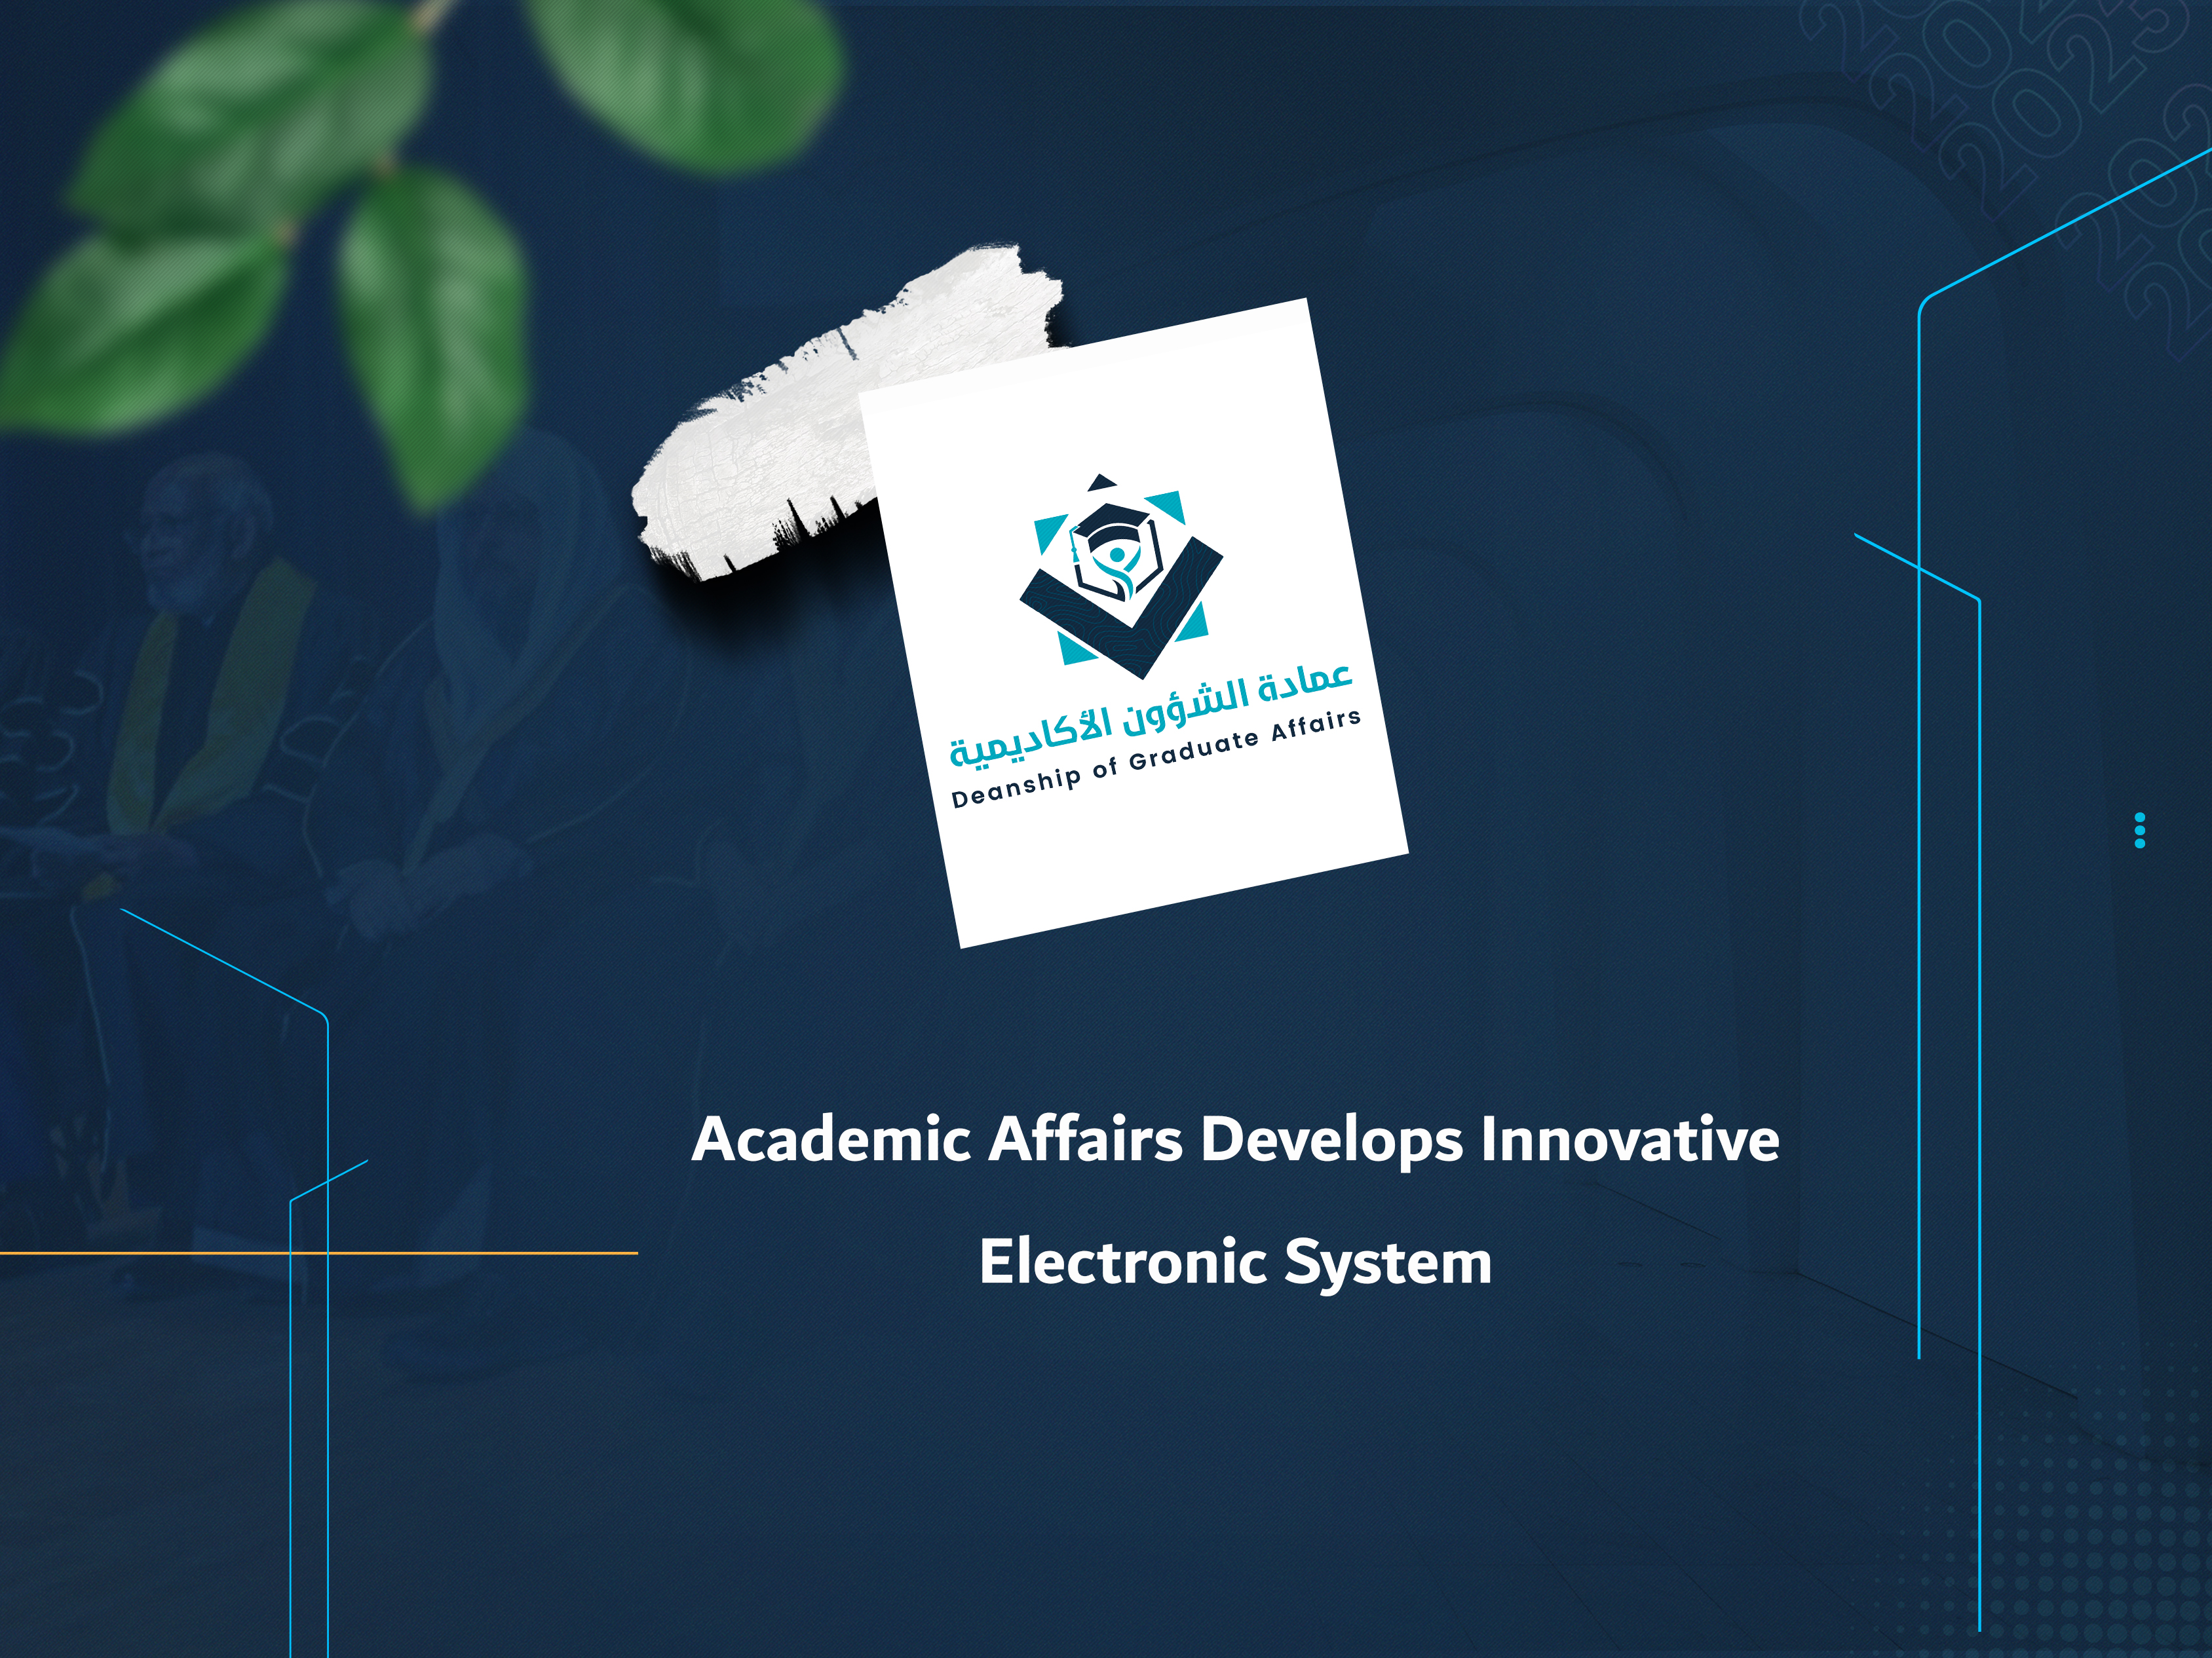 Academic Affairs Develops Innovative Electronic System